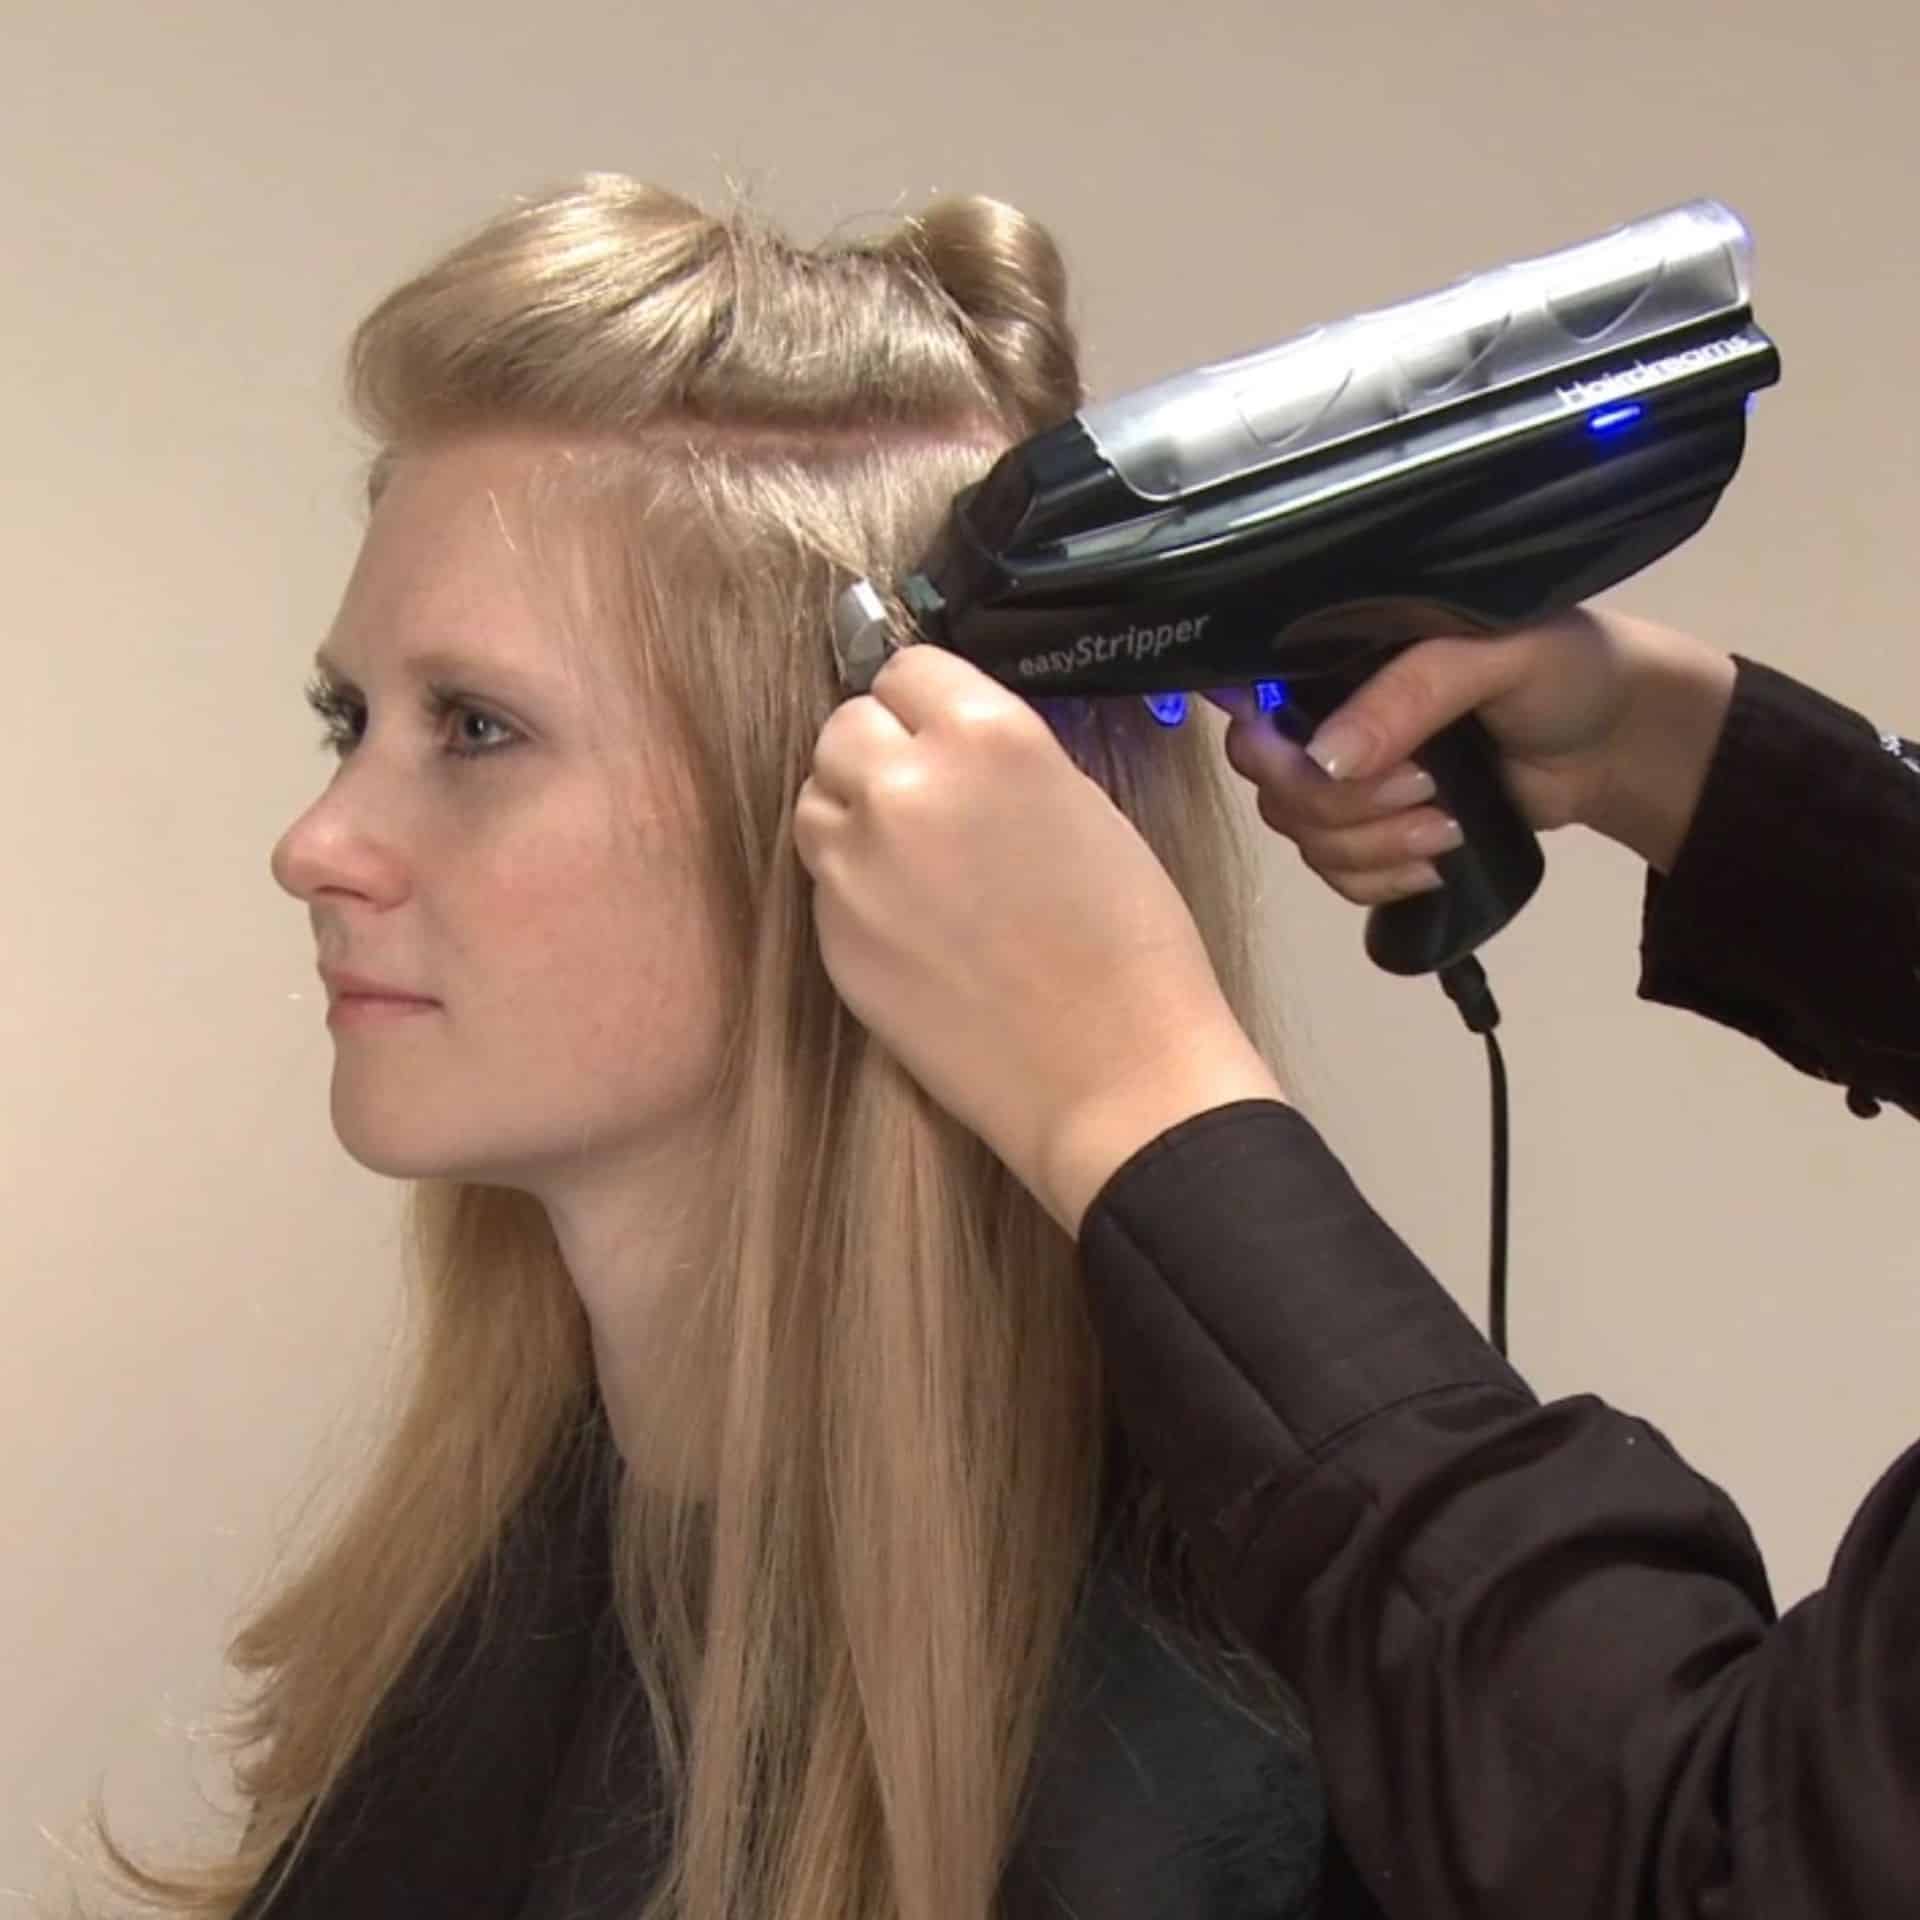 A hairdresser removes a client's bonding extensions with the EasyStripper from Hairdreams.